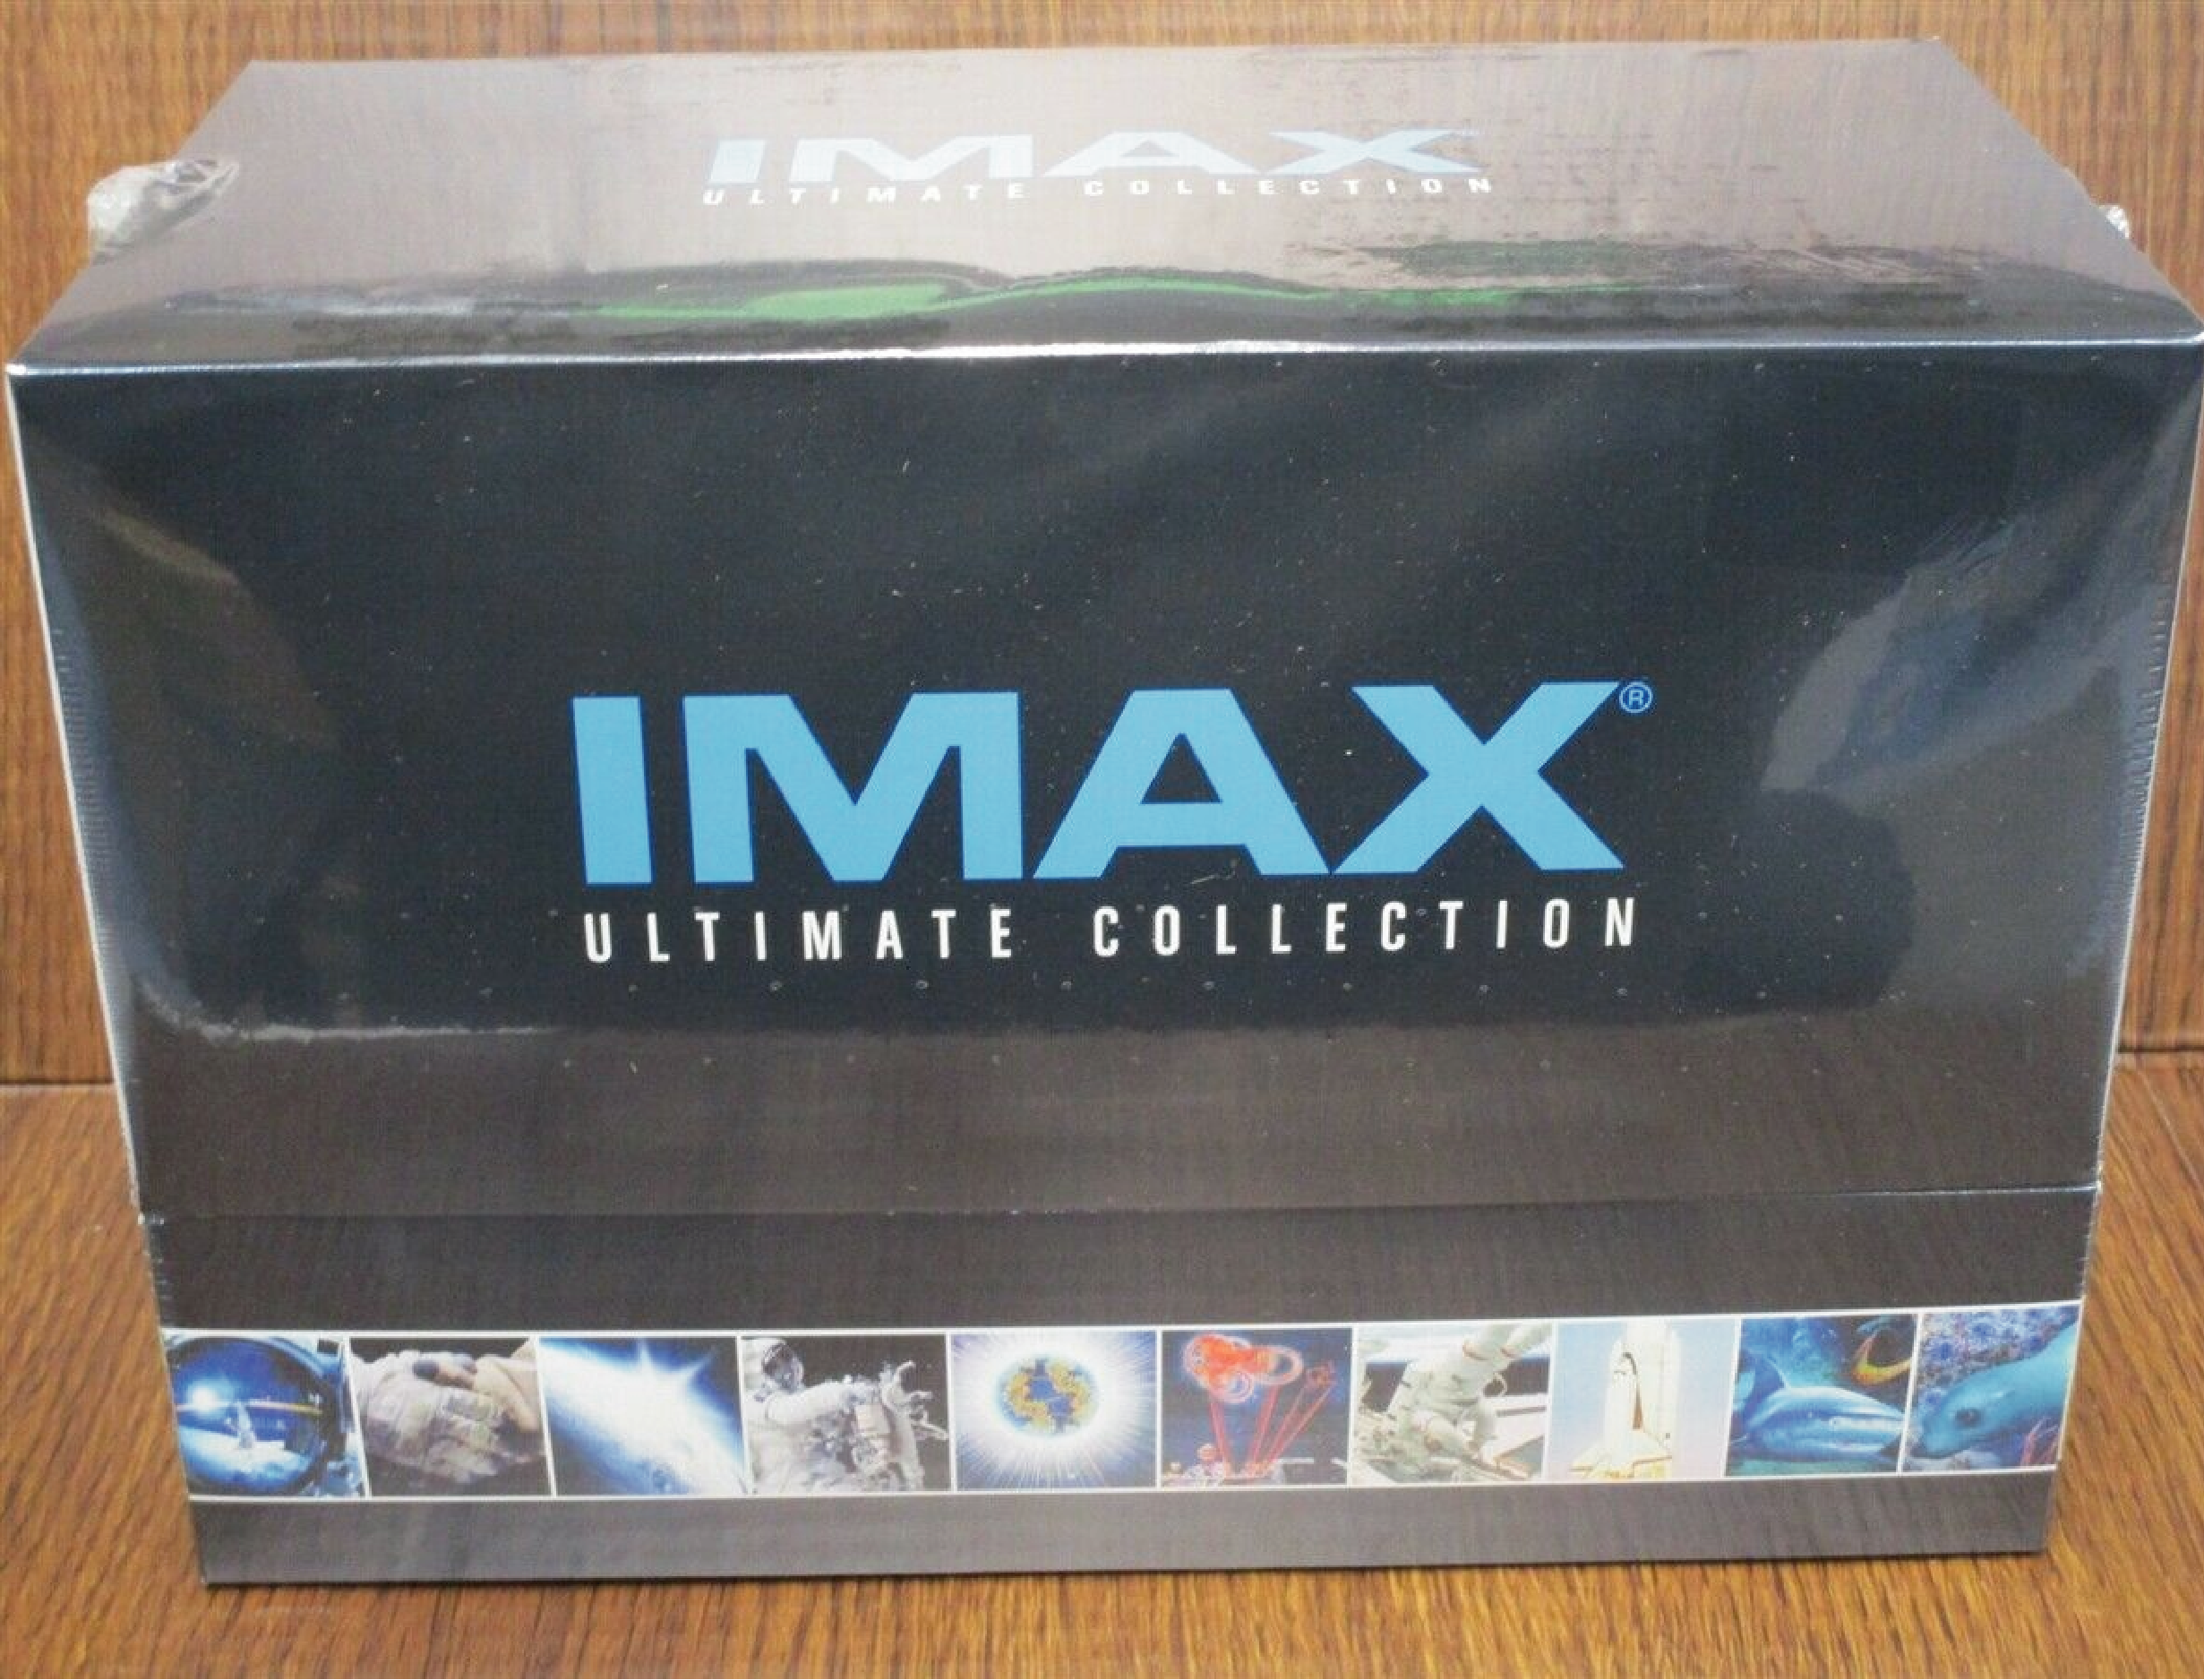 IMAX Ultimate Collection (DVD, 2007, 20-Disc Set) NEW, SEALED